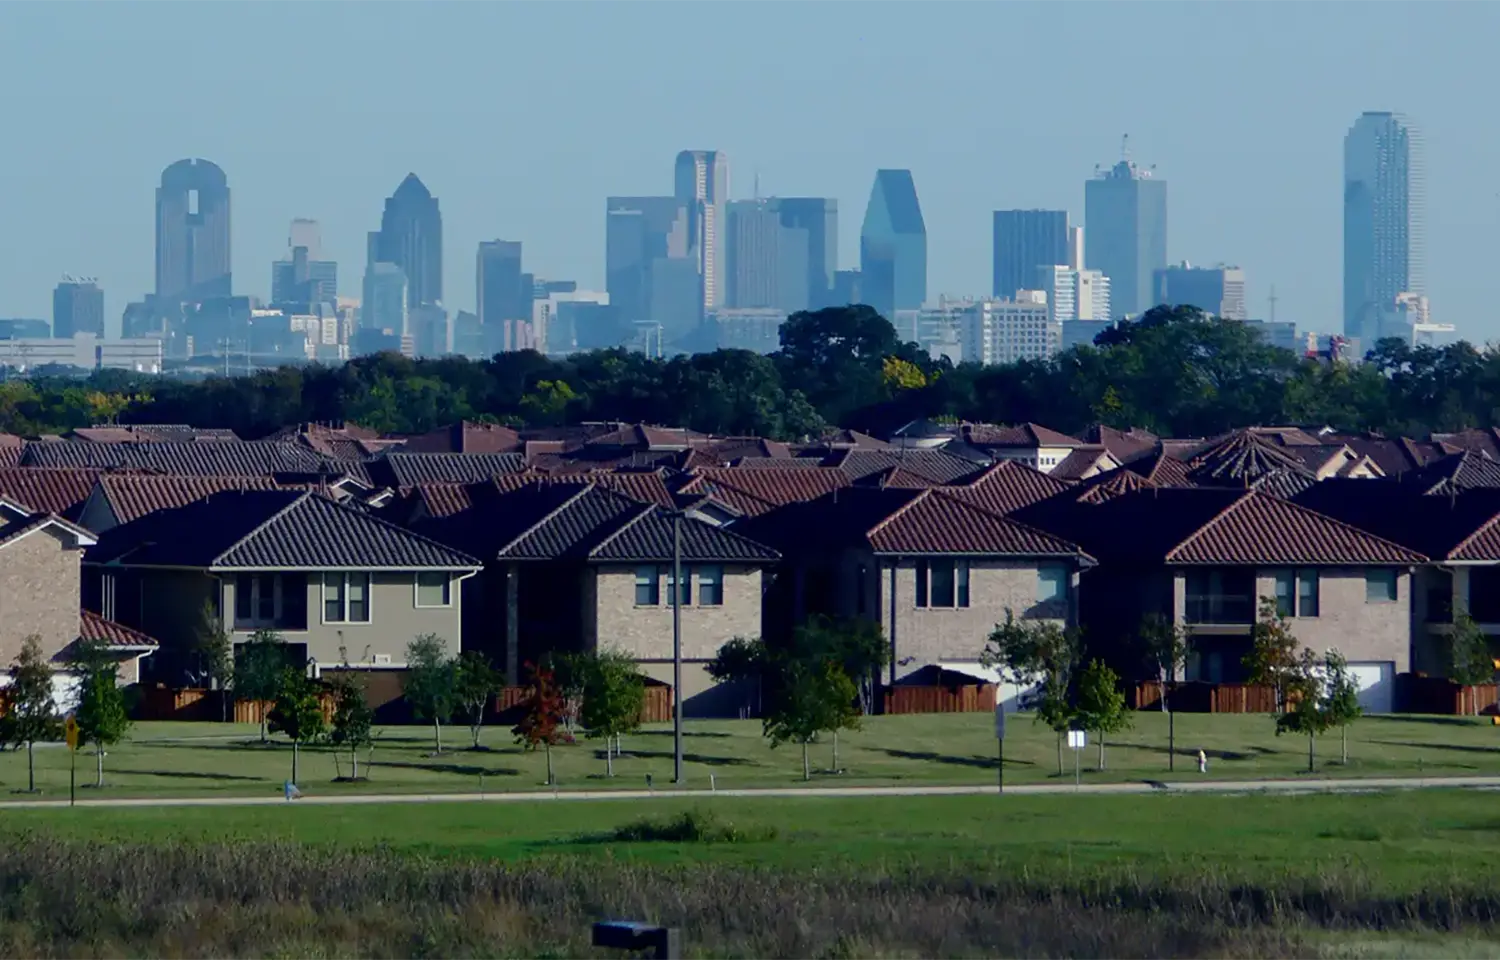 A landscape photo, in the foreground are rows of identical houses, and in the background are the highrises of the Dallas city skyline.